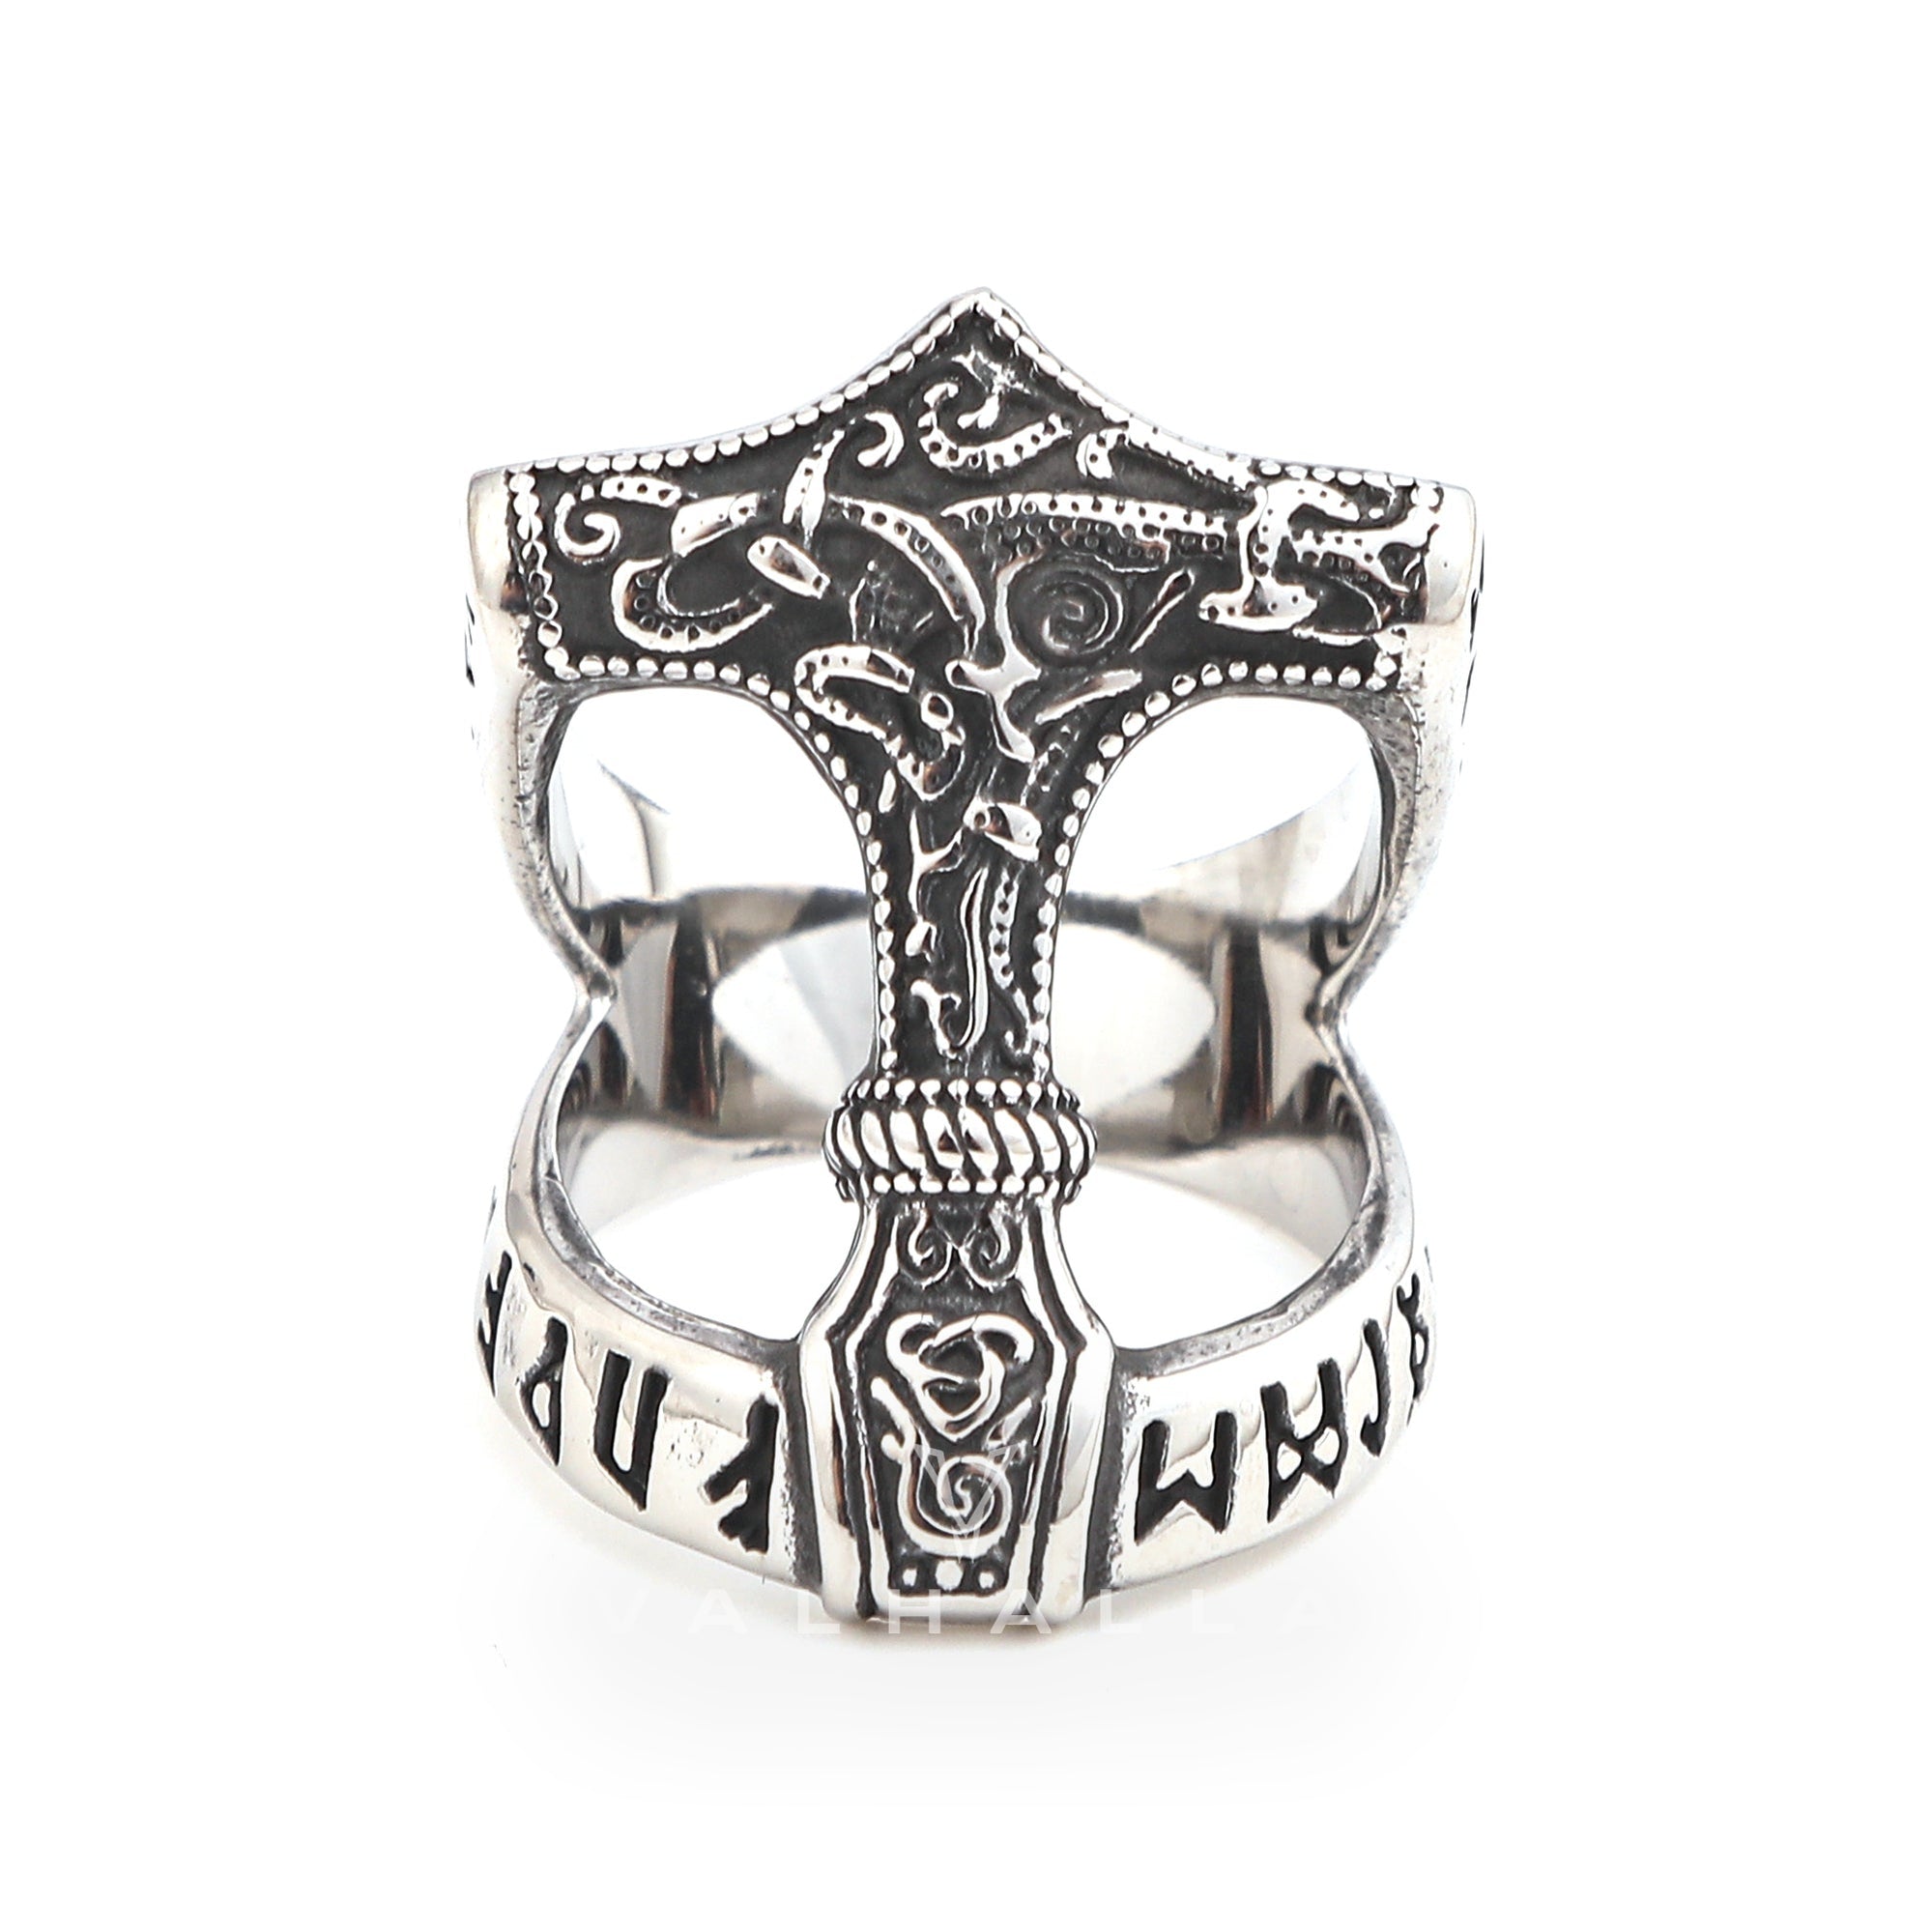 Handcrafted Stainless Steel Open Thor's Hammer Ring